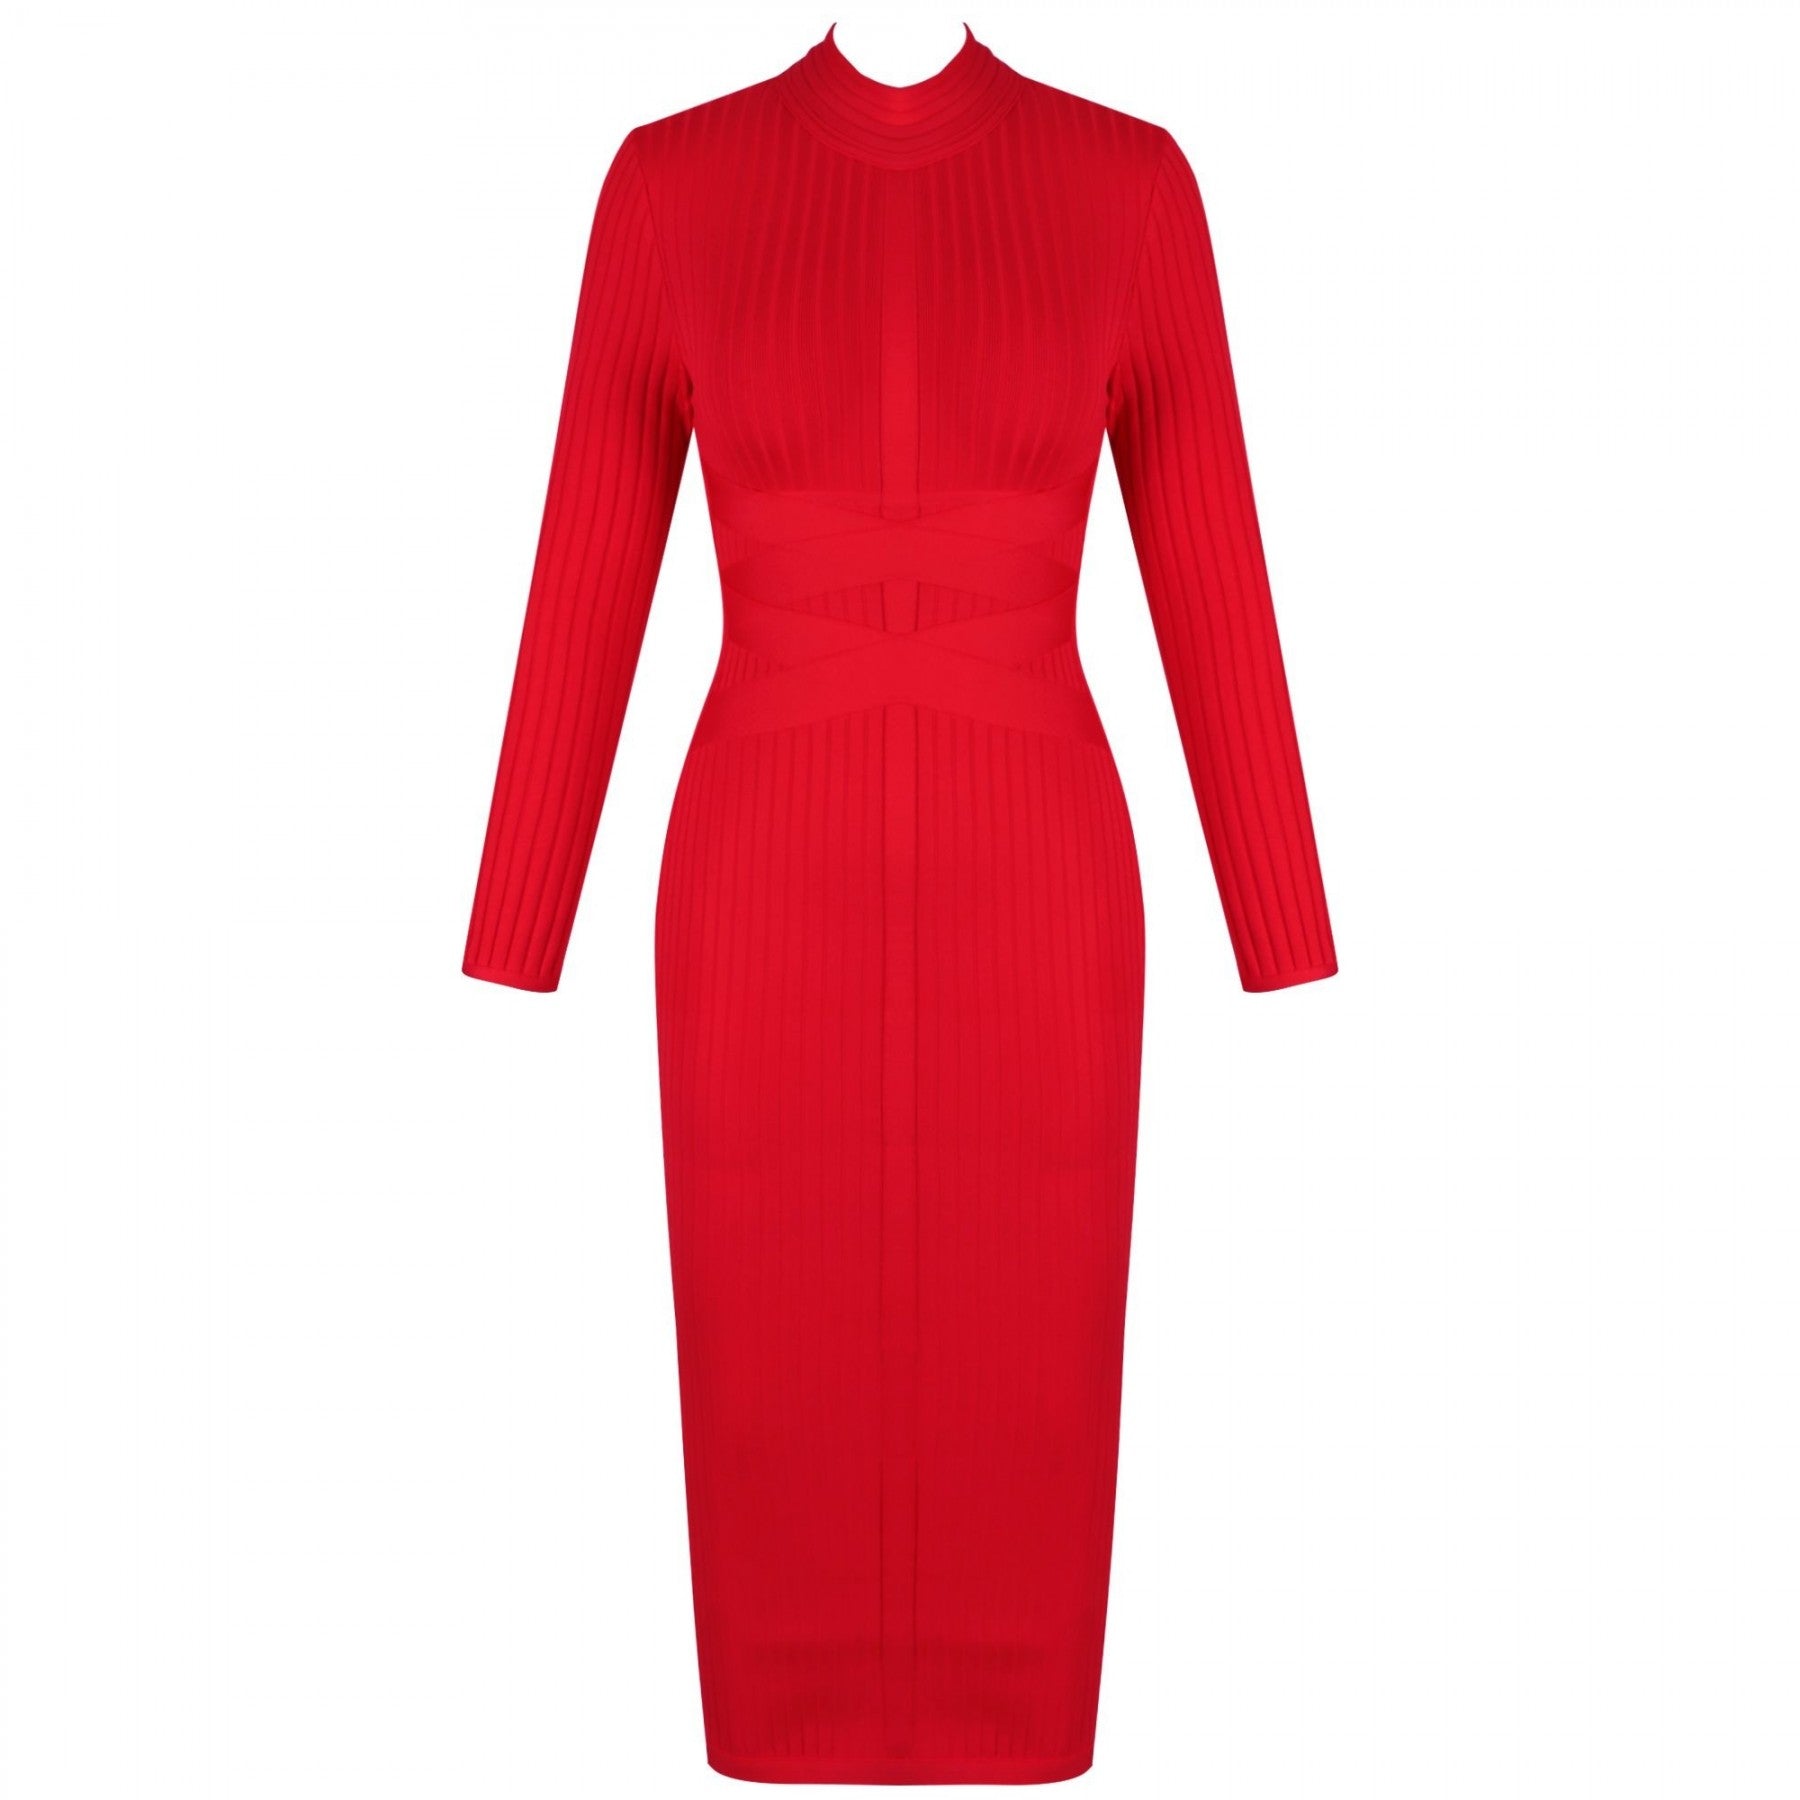 Round Neck Long Sleeve Striped Over Knee Bandage Dress PF1201 16 in wolddress